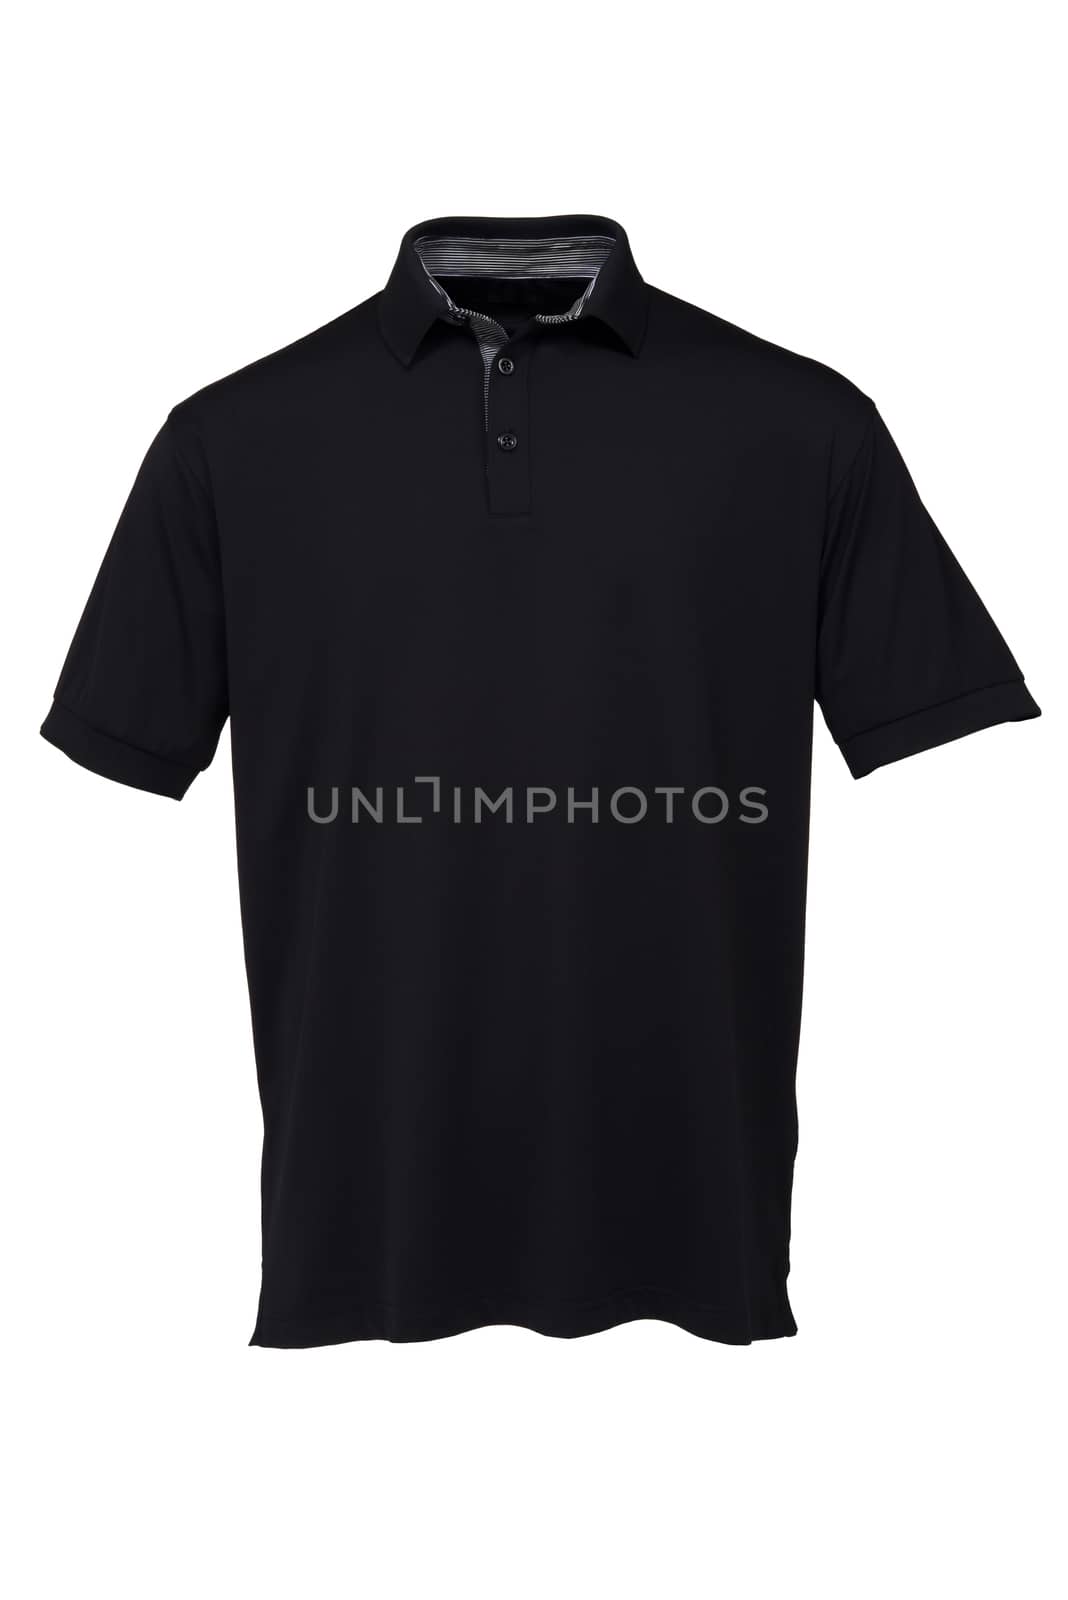 Black golf tee shirt with black and white collar for man on white background